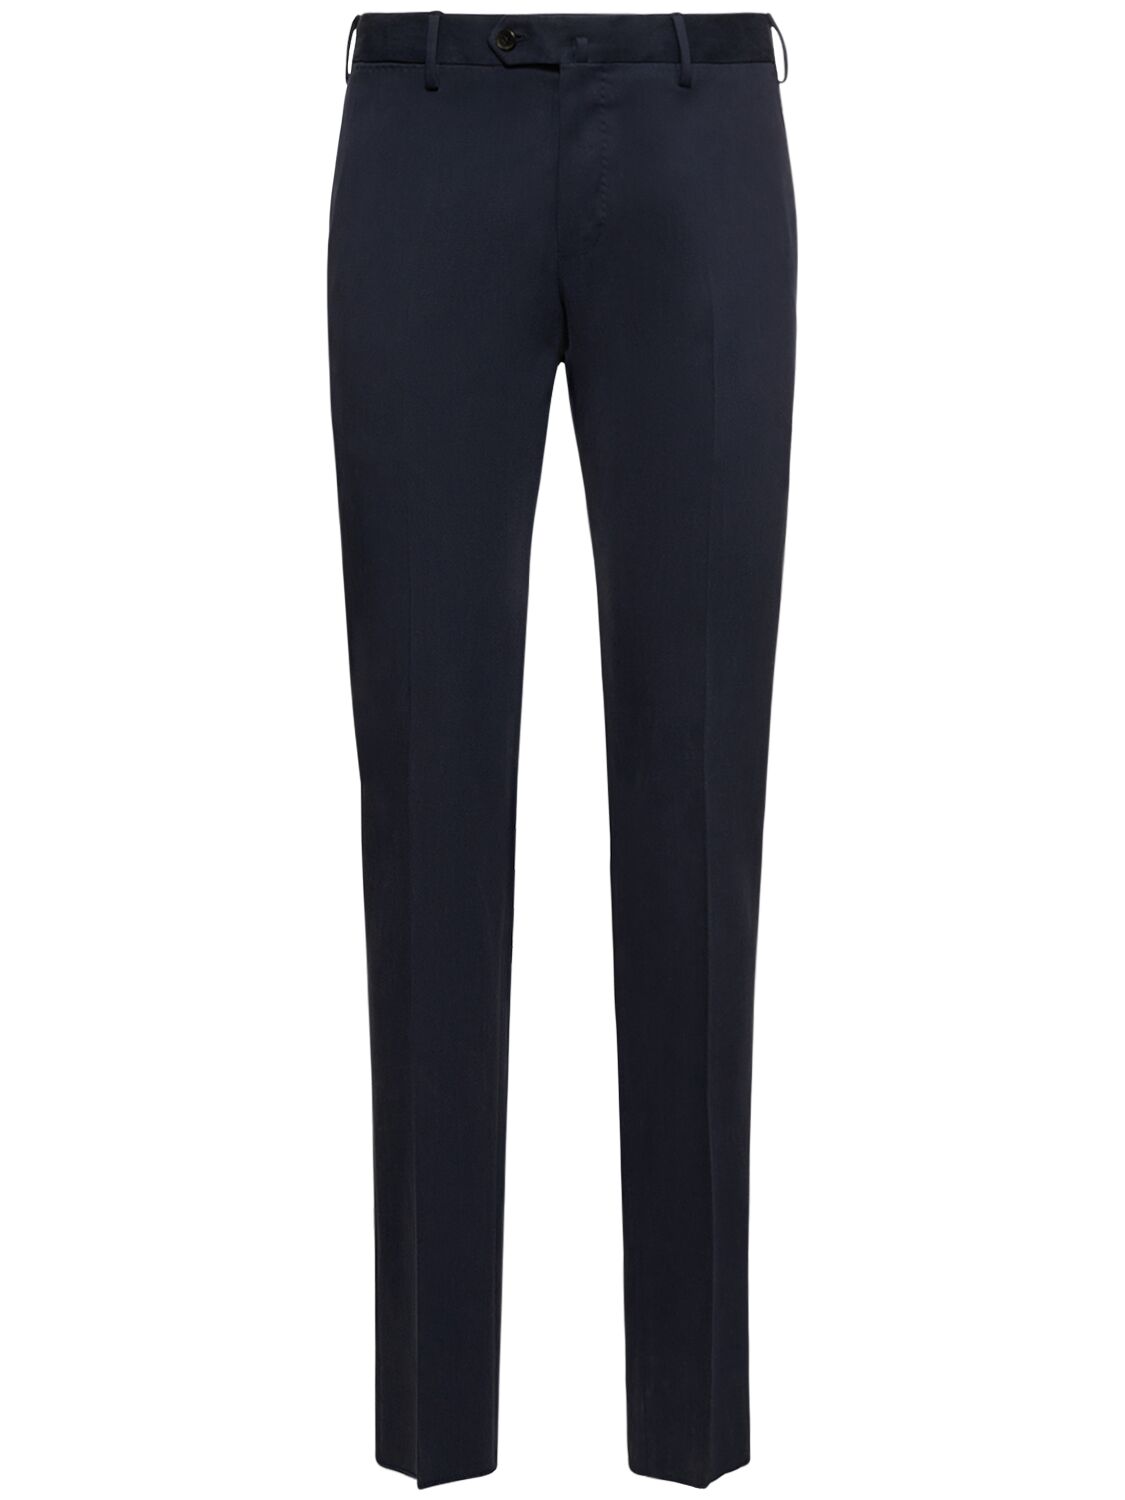 Image of Classic Cotton Blend Straight Pants